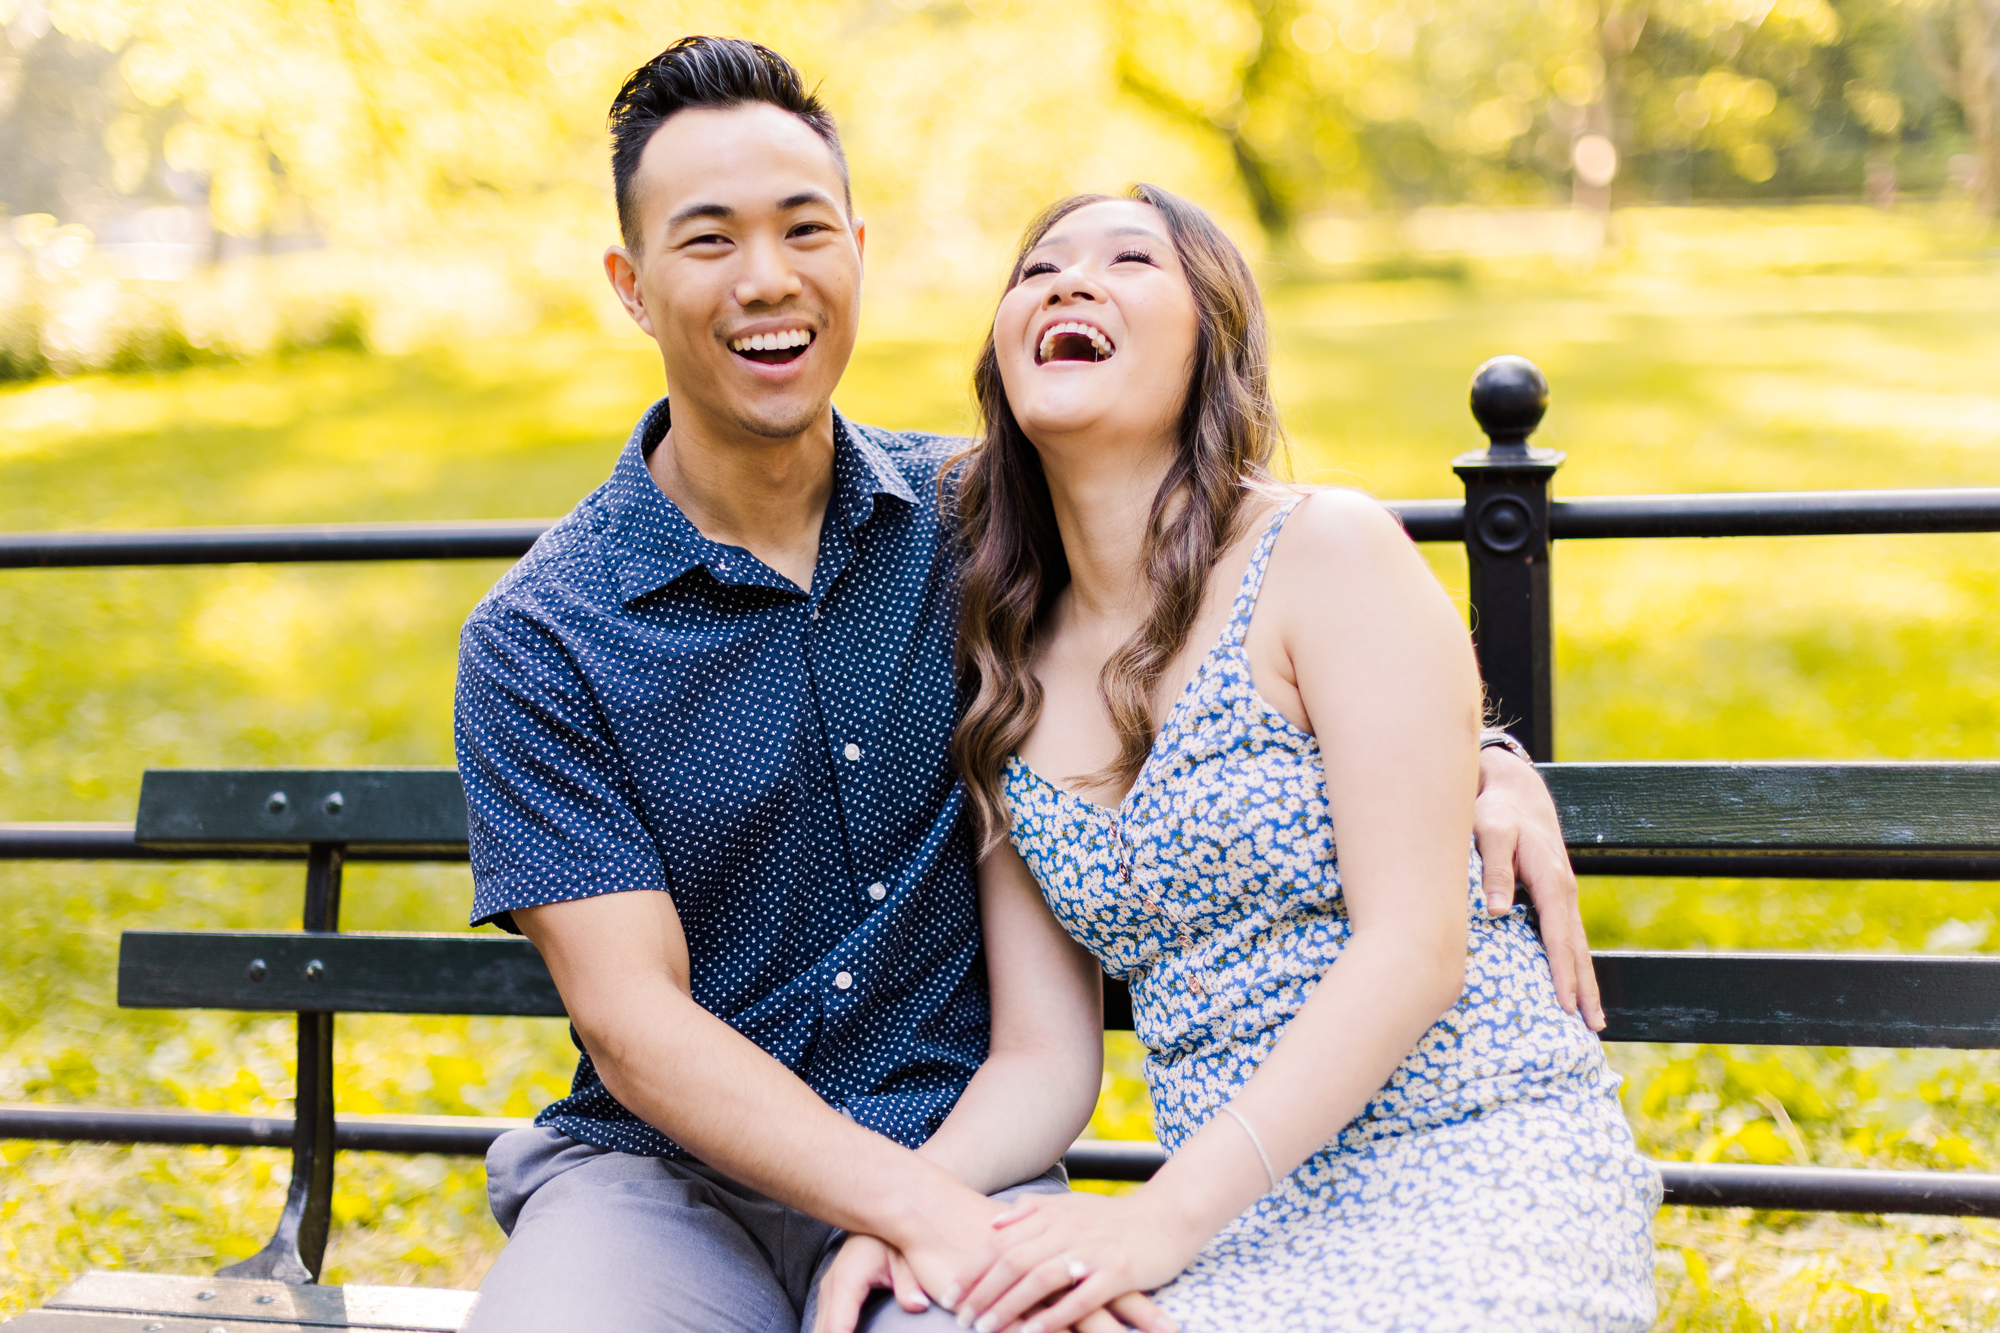 Timeless Engagement Photos in Central Park, New York